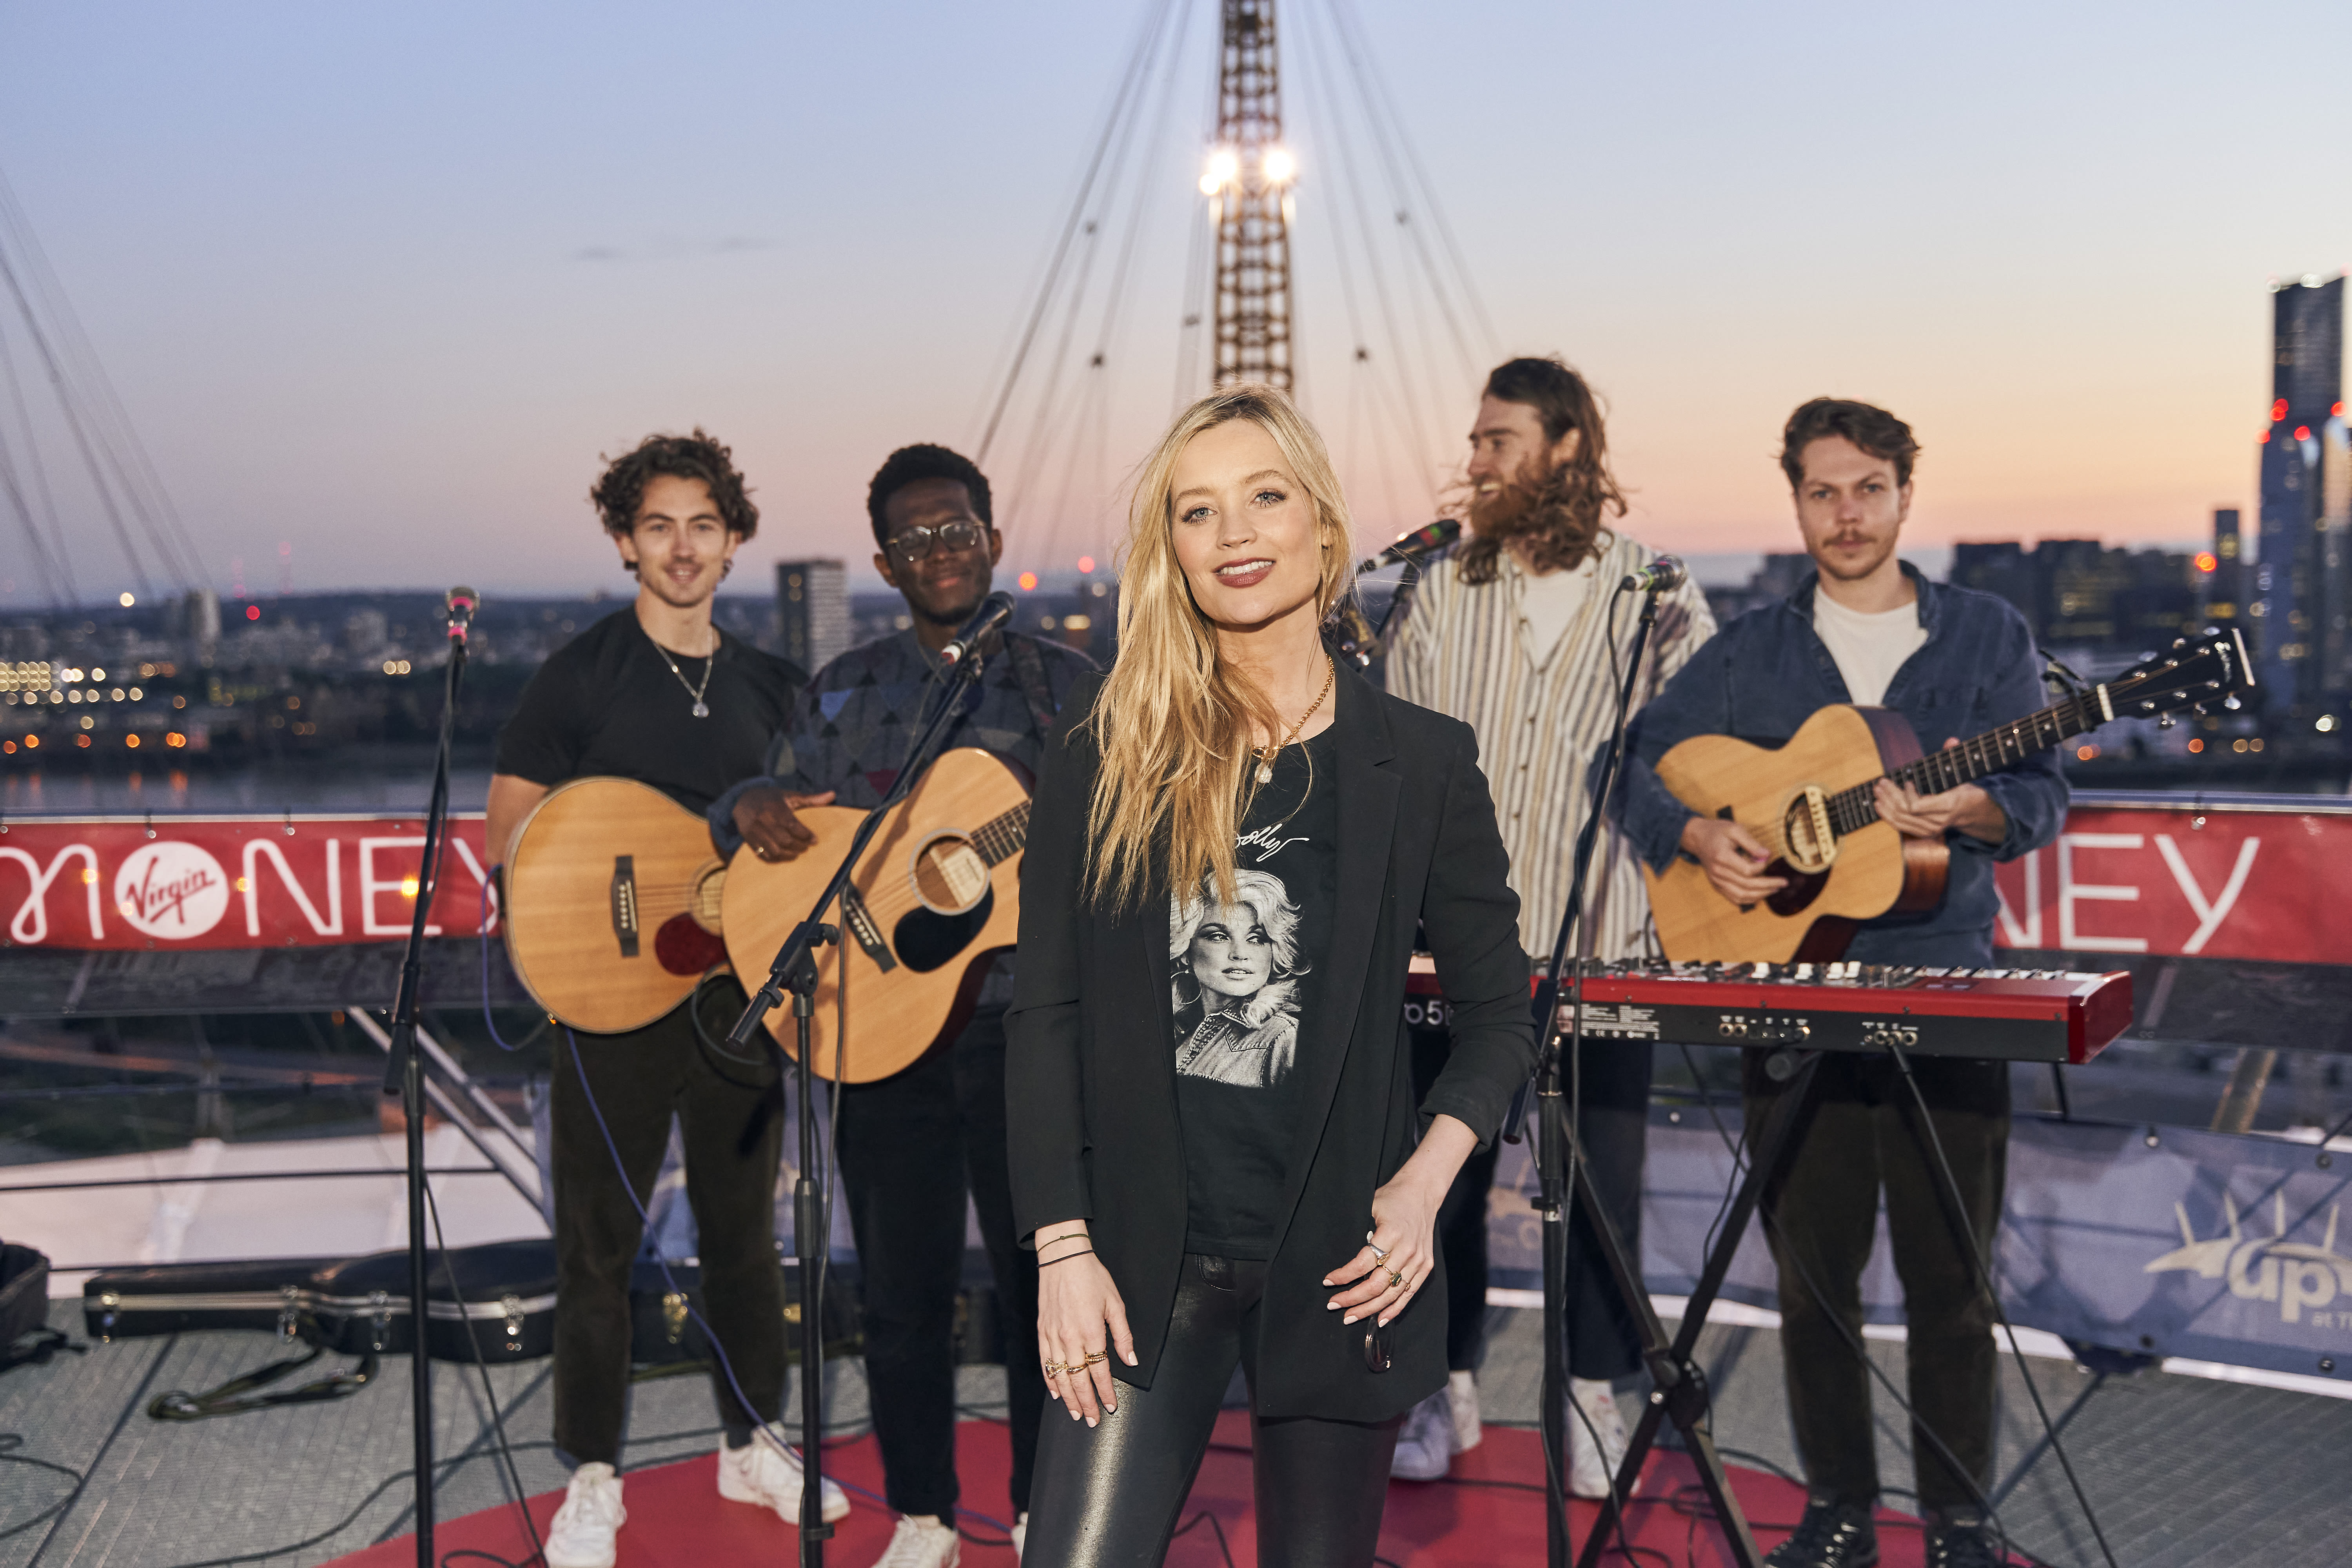 Laura Whitmore and Mosa Wild on stage at Virgin Money's Up At The O2 gigs